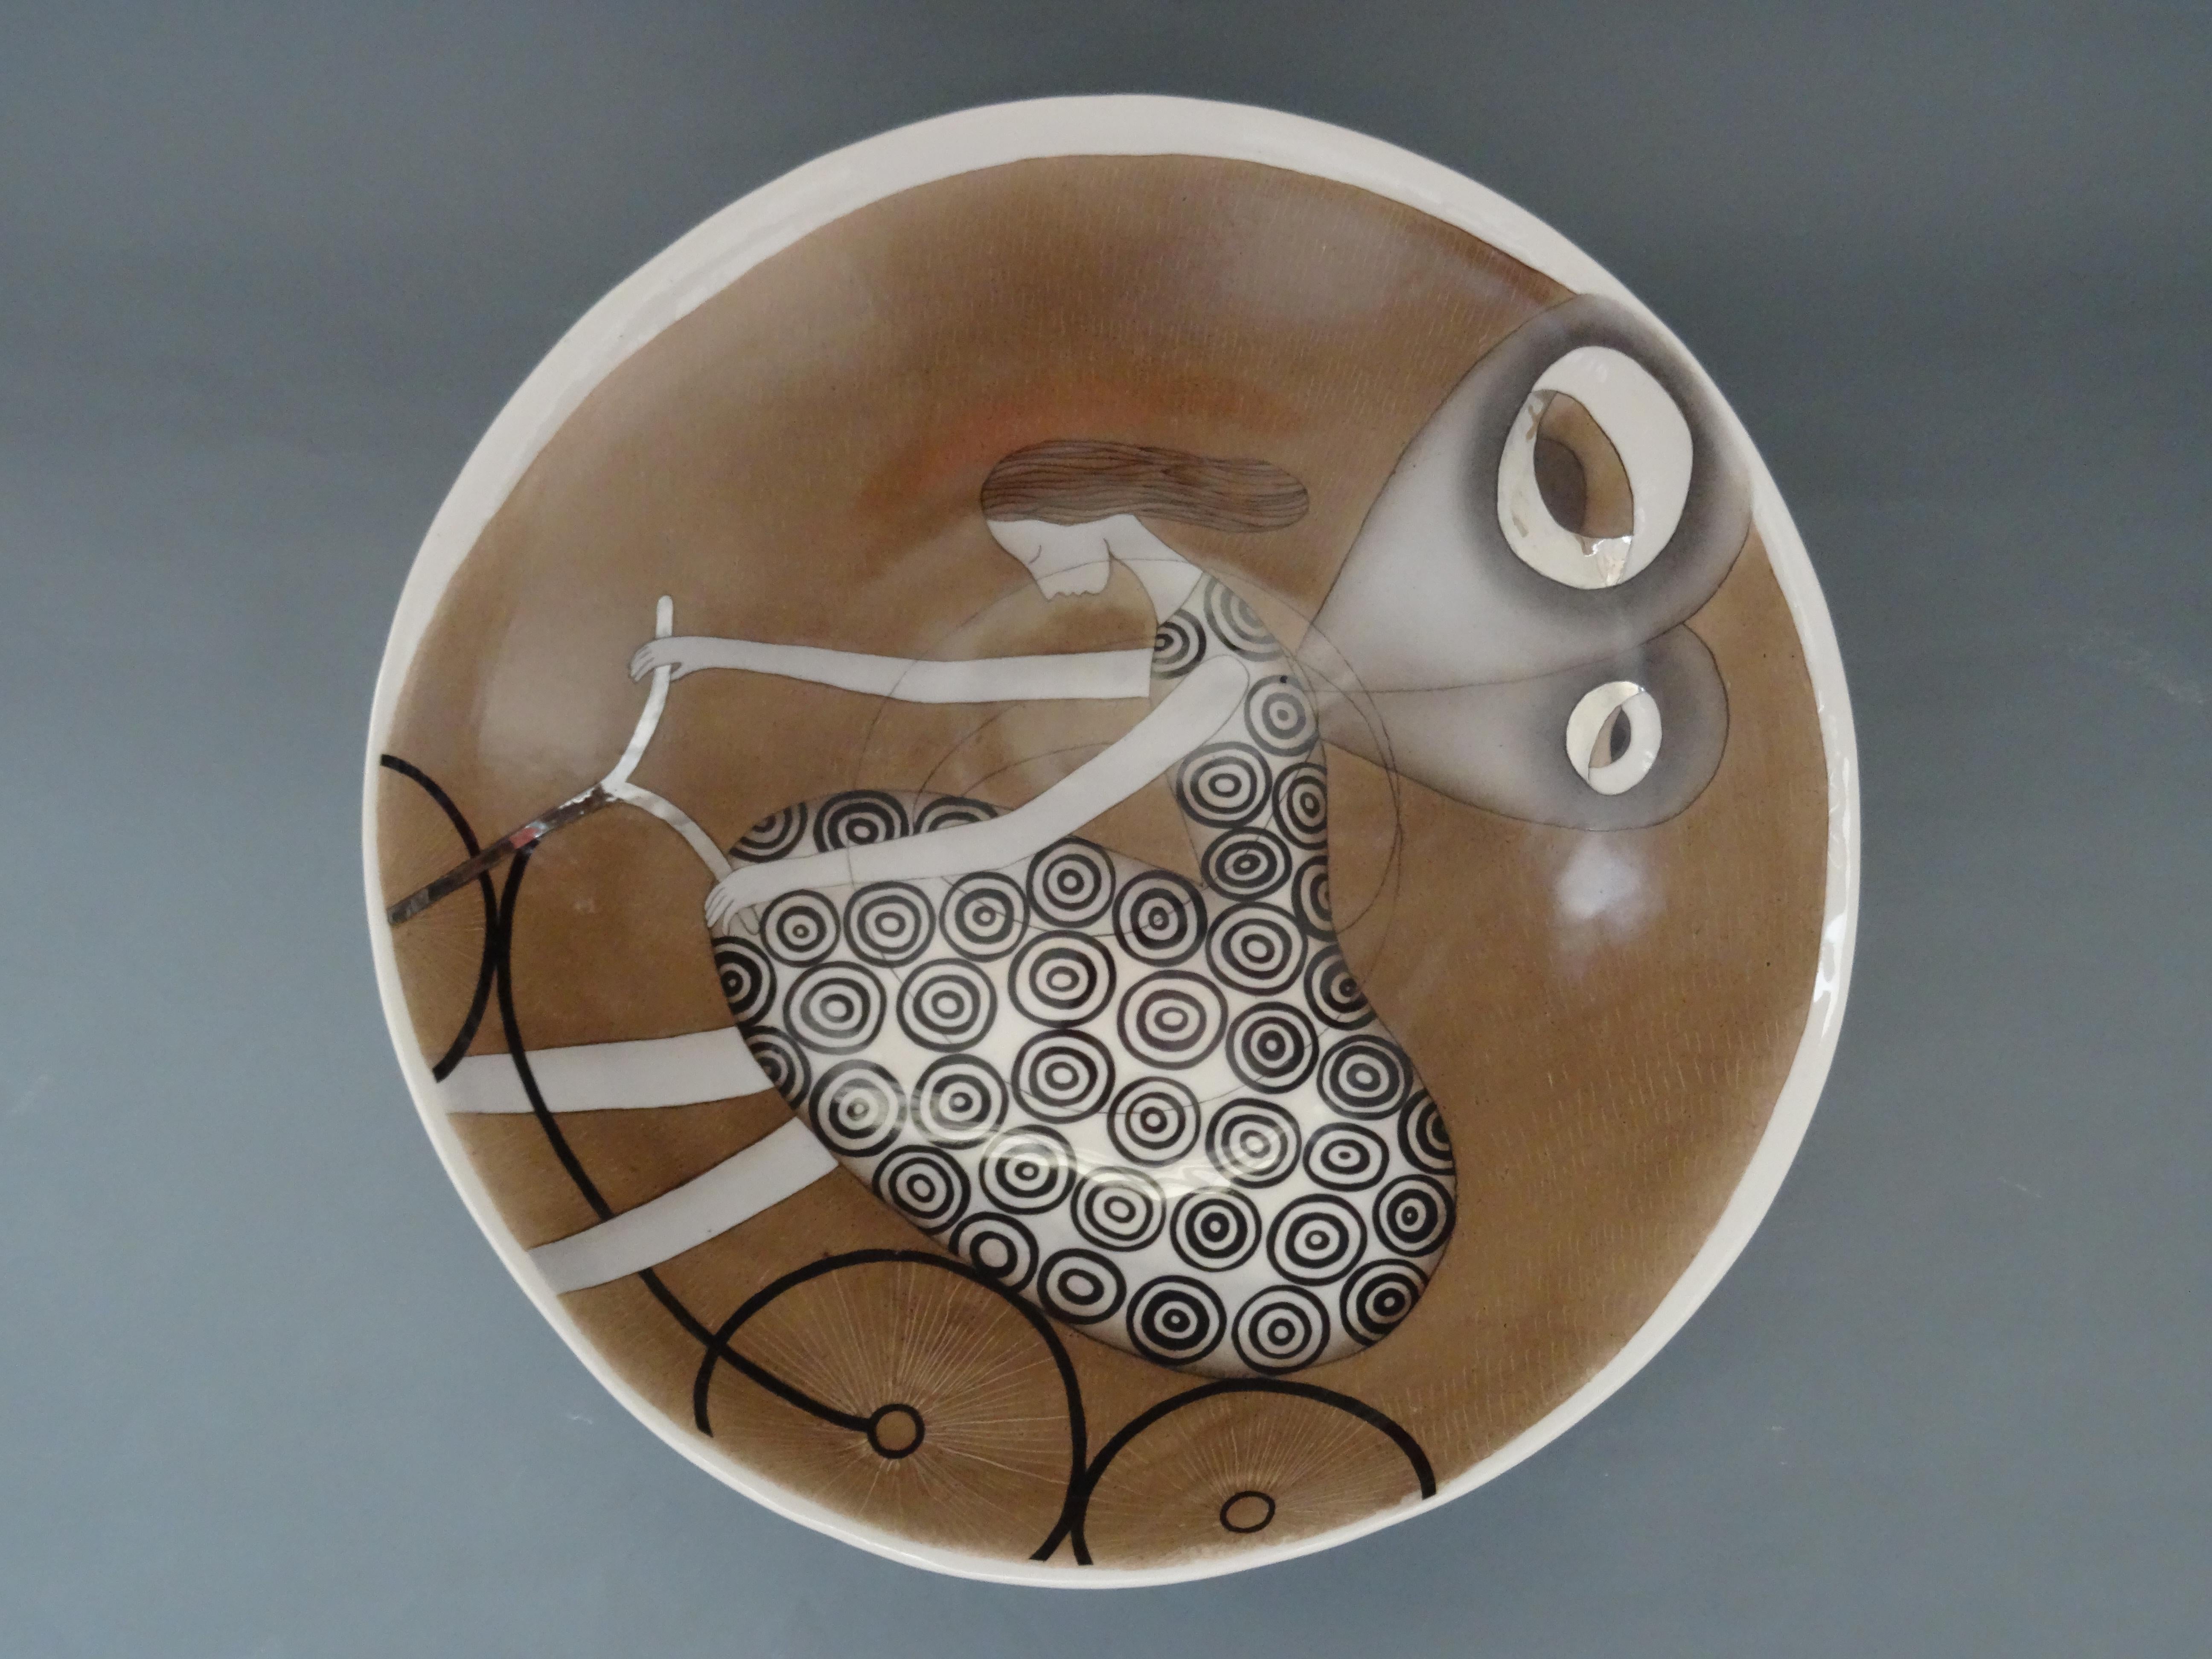 Porcelain plate - A cyclist with wings. 2016, d 36 cm - Sculpture by Inese Margevica 